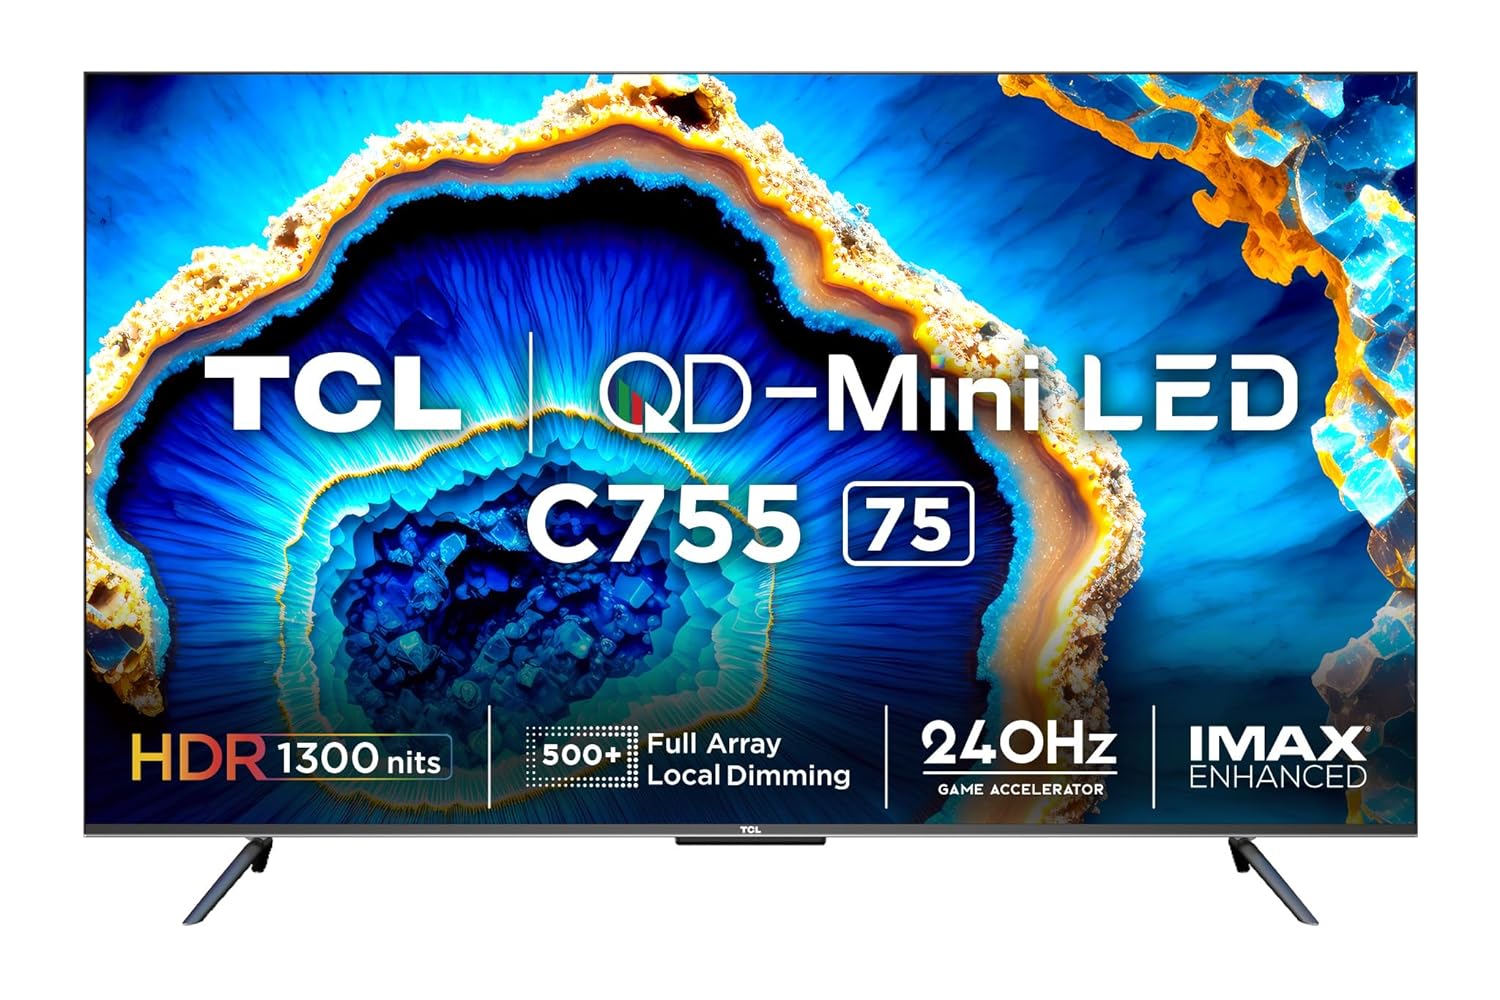 TCL C755 4K QD-Mini LED TVs now available for purchase in India - Gizmochina